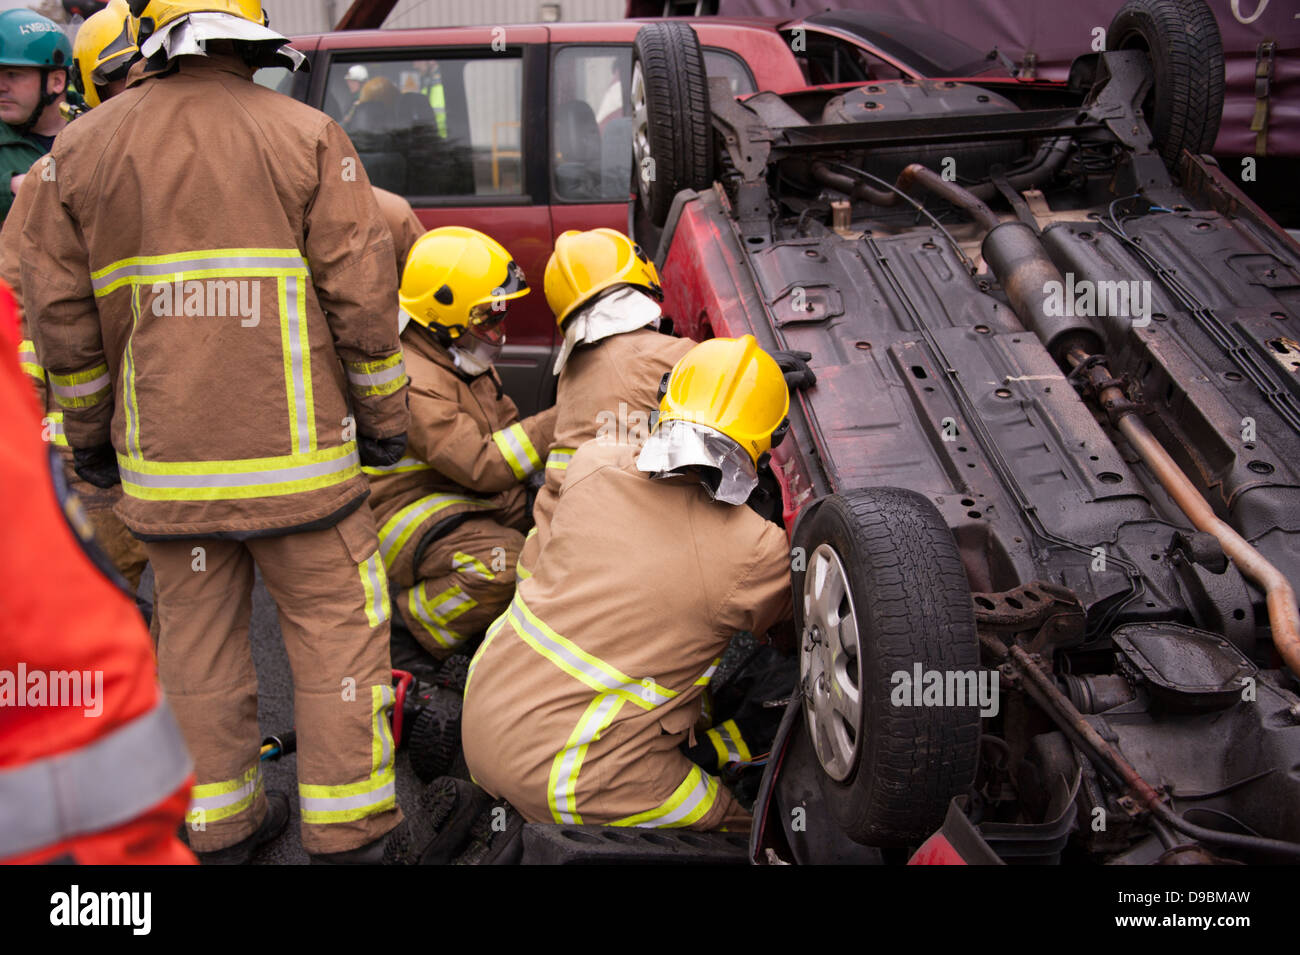 Car Crashed upside down Firemen rescue Driver Stock Photo